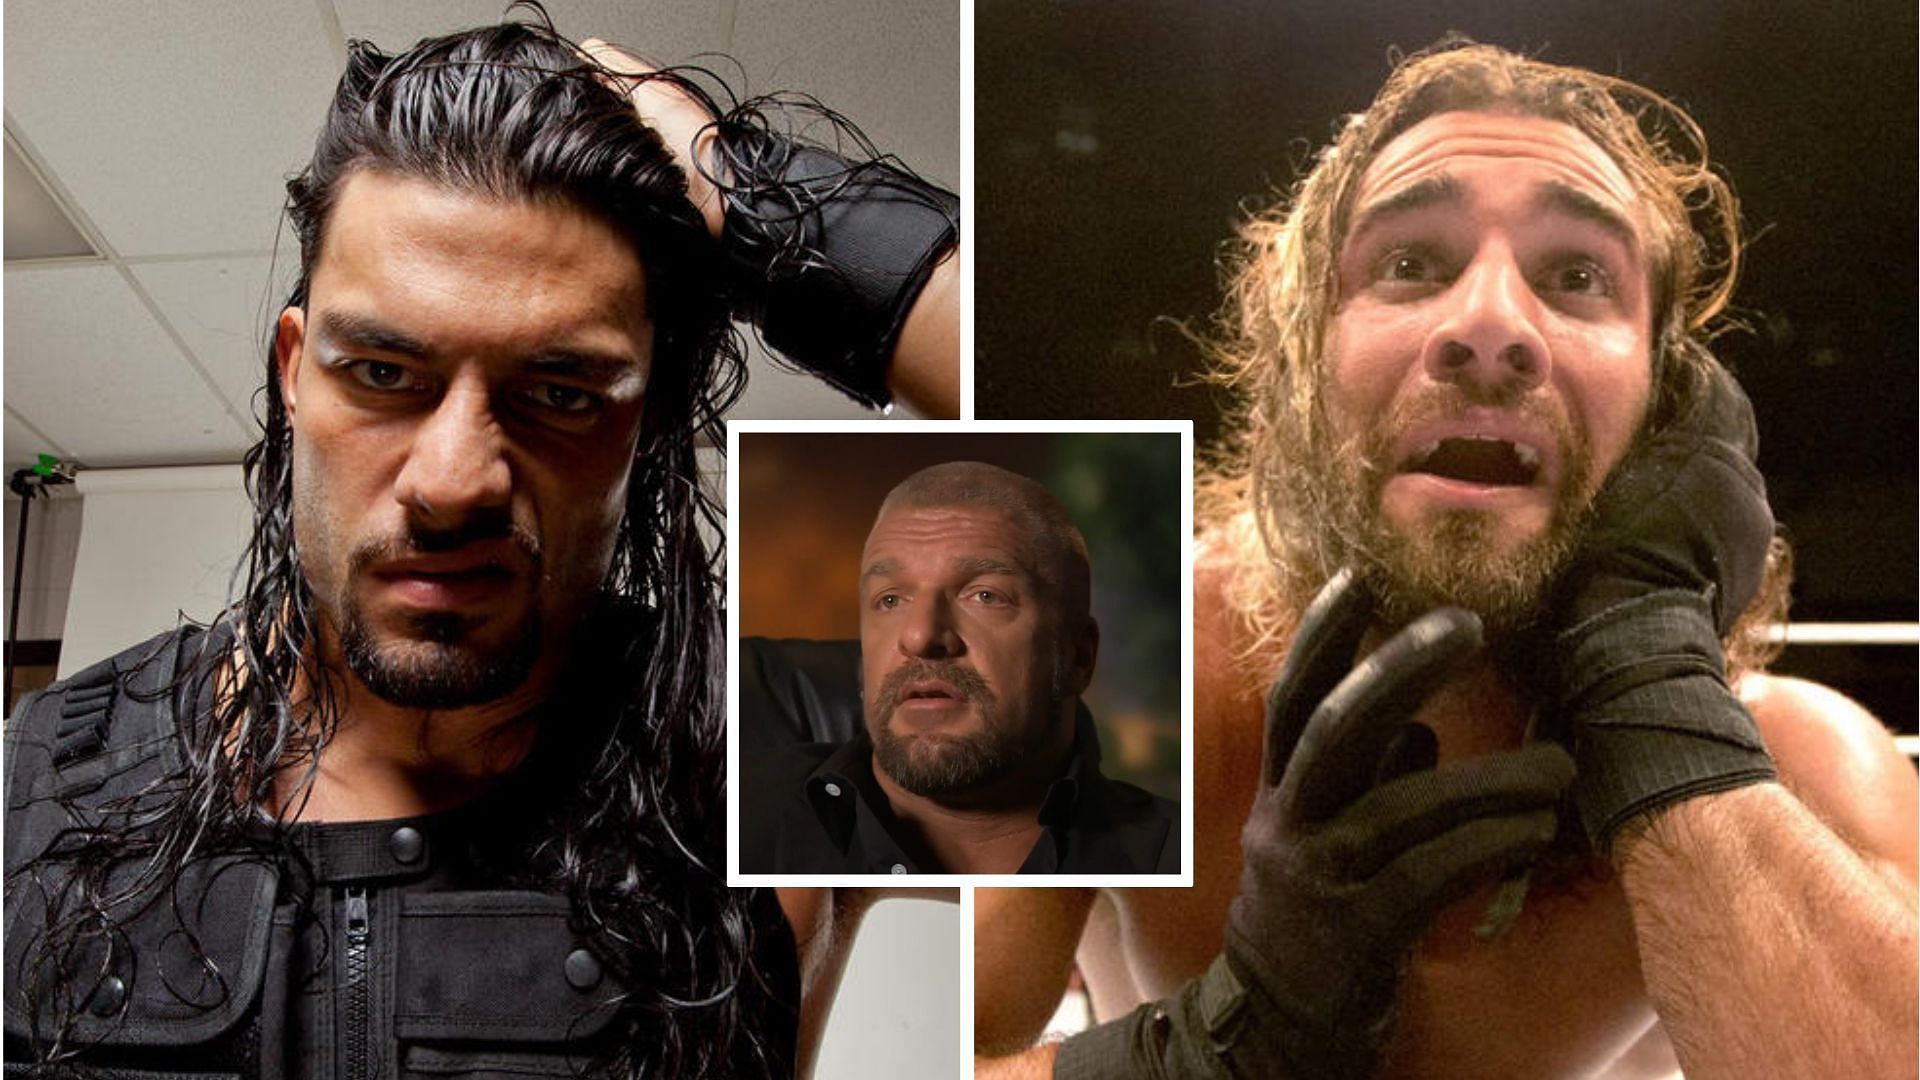 Roman Reigns (left), Triple H (center), and Seth Rollins (right)